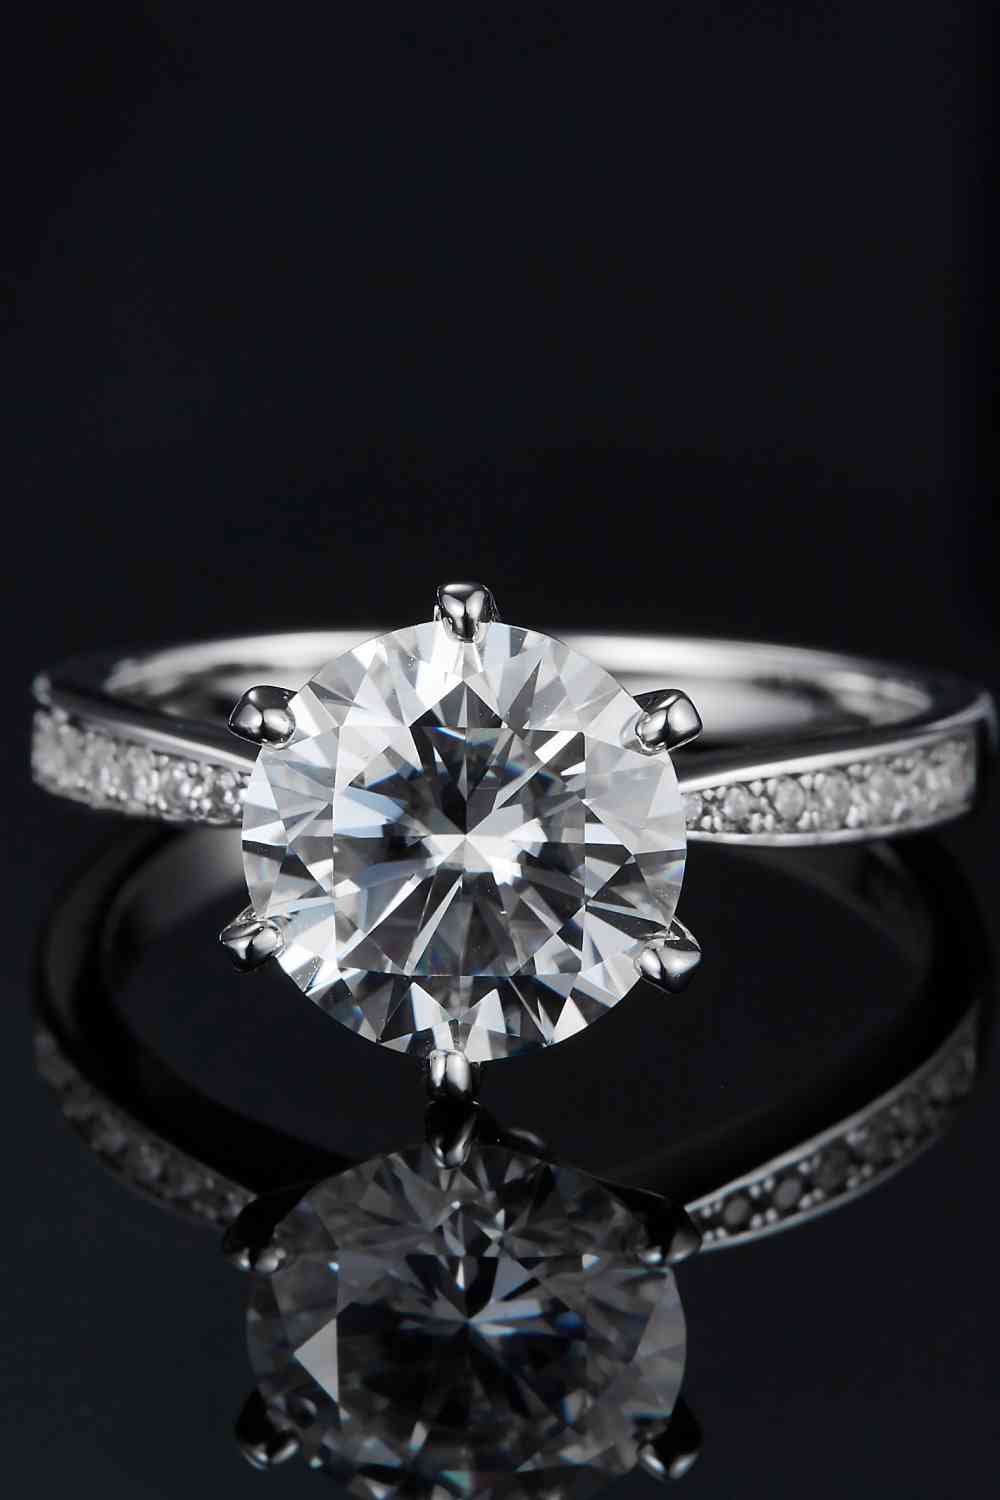 a diamond engagement ring on a black surface